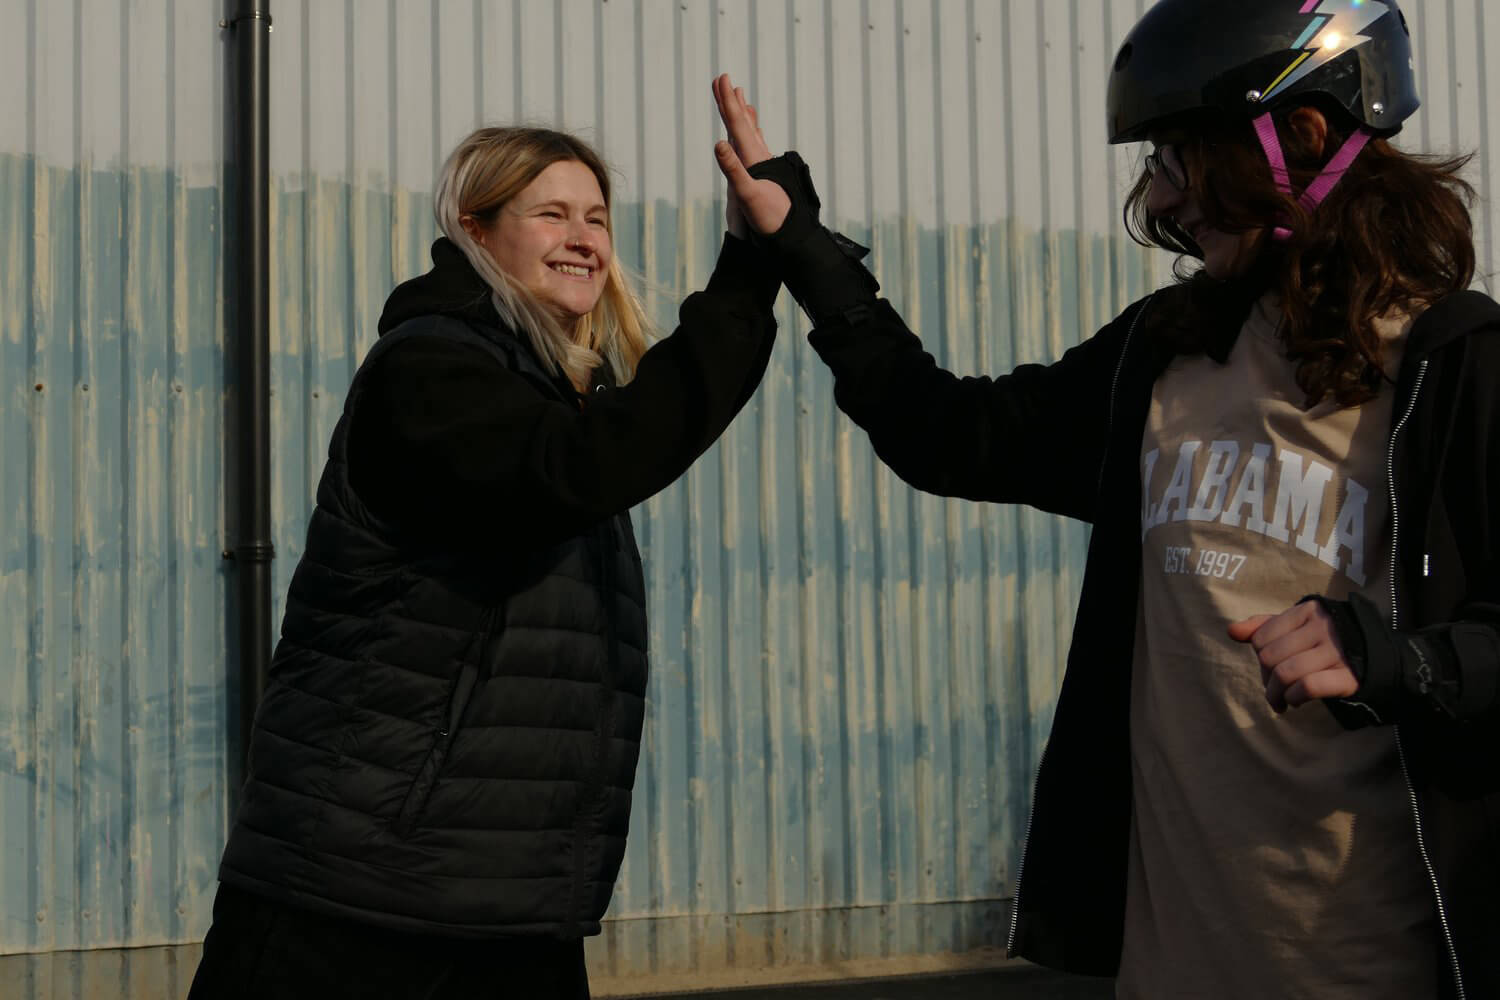 Elsie the skateboard coach gives a high five to a young person. 